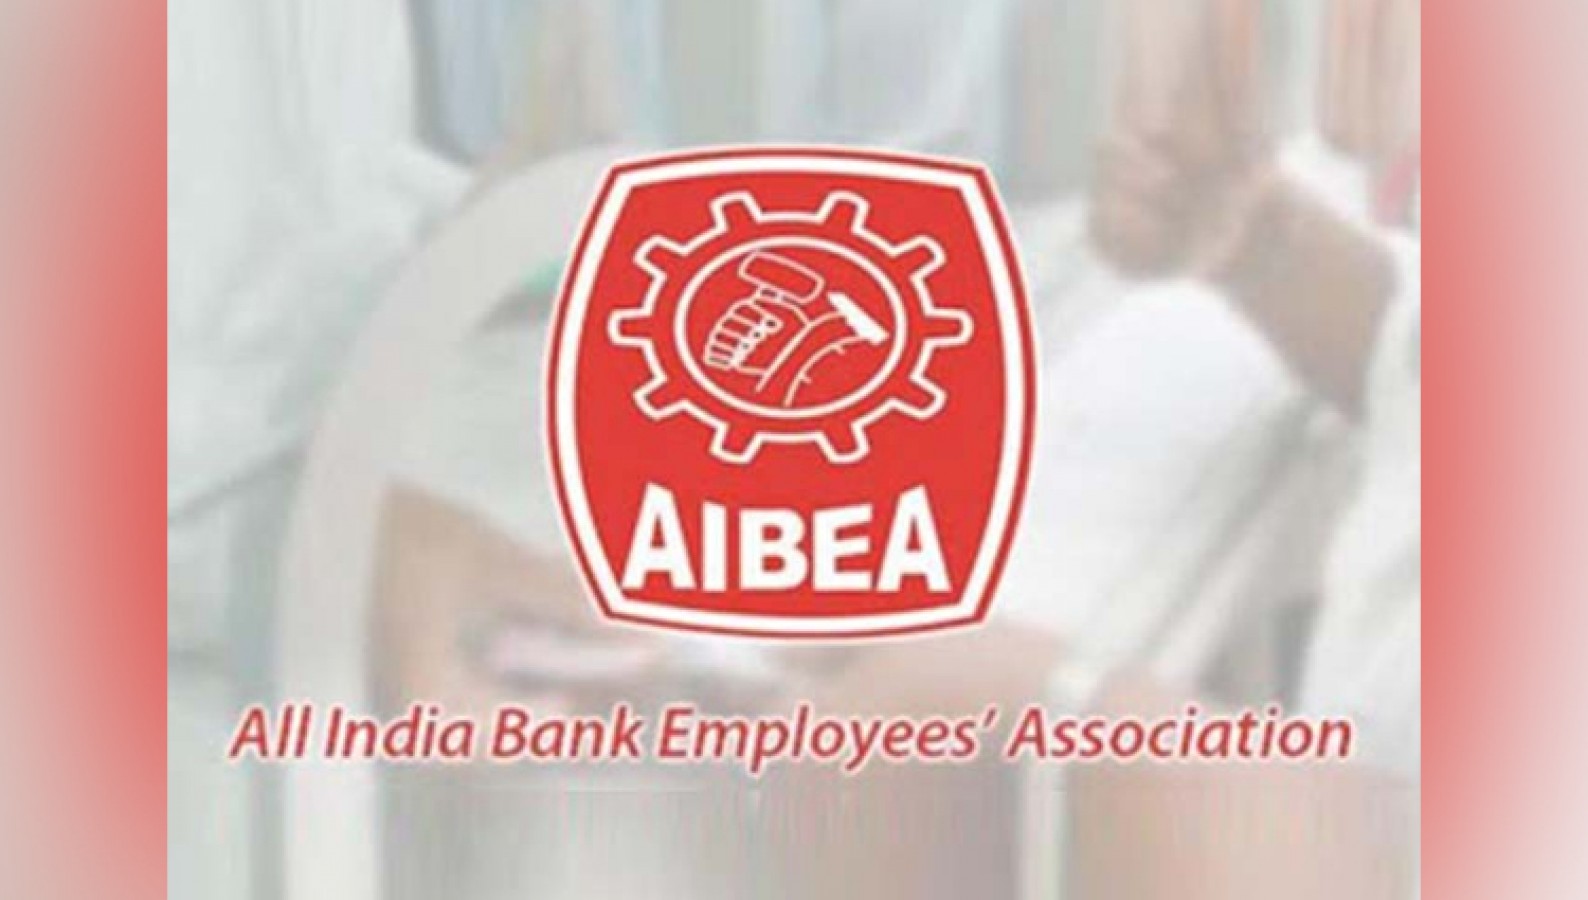 Bank-wise strikes from December 4: AIBEA - The Hitavada